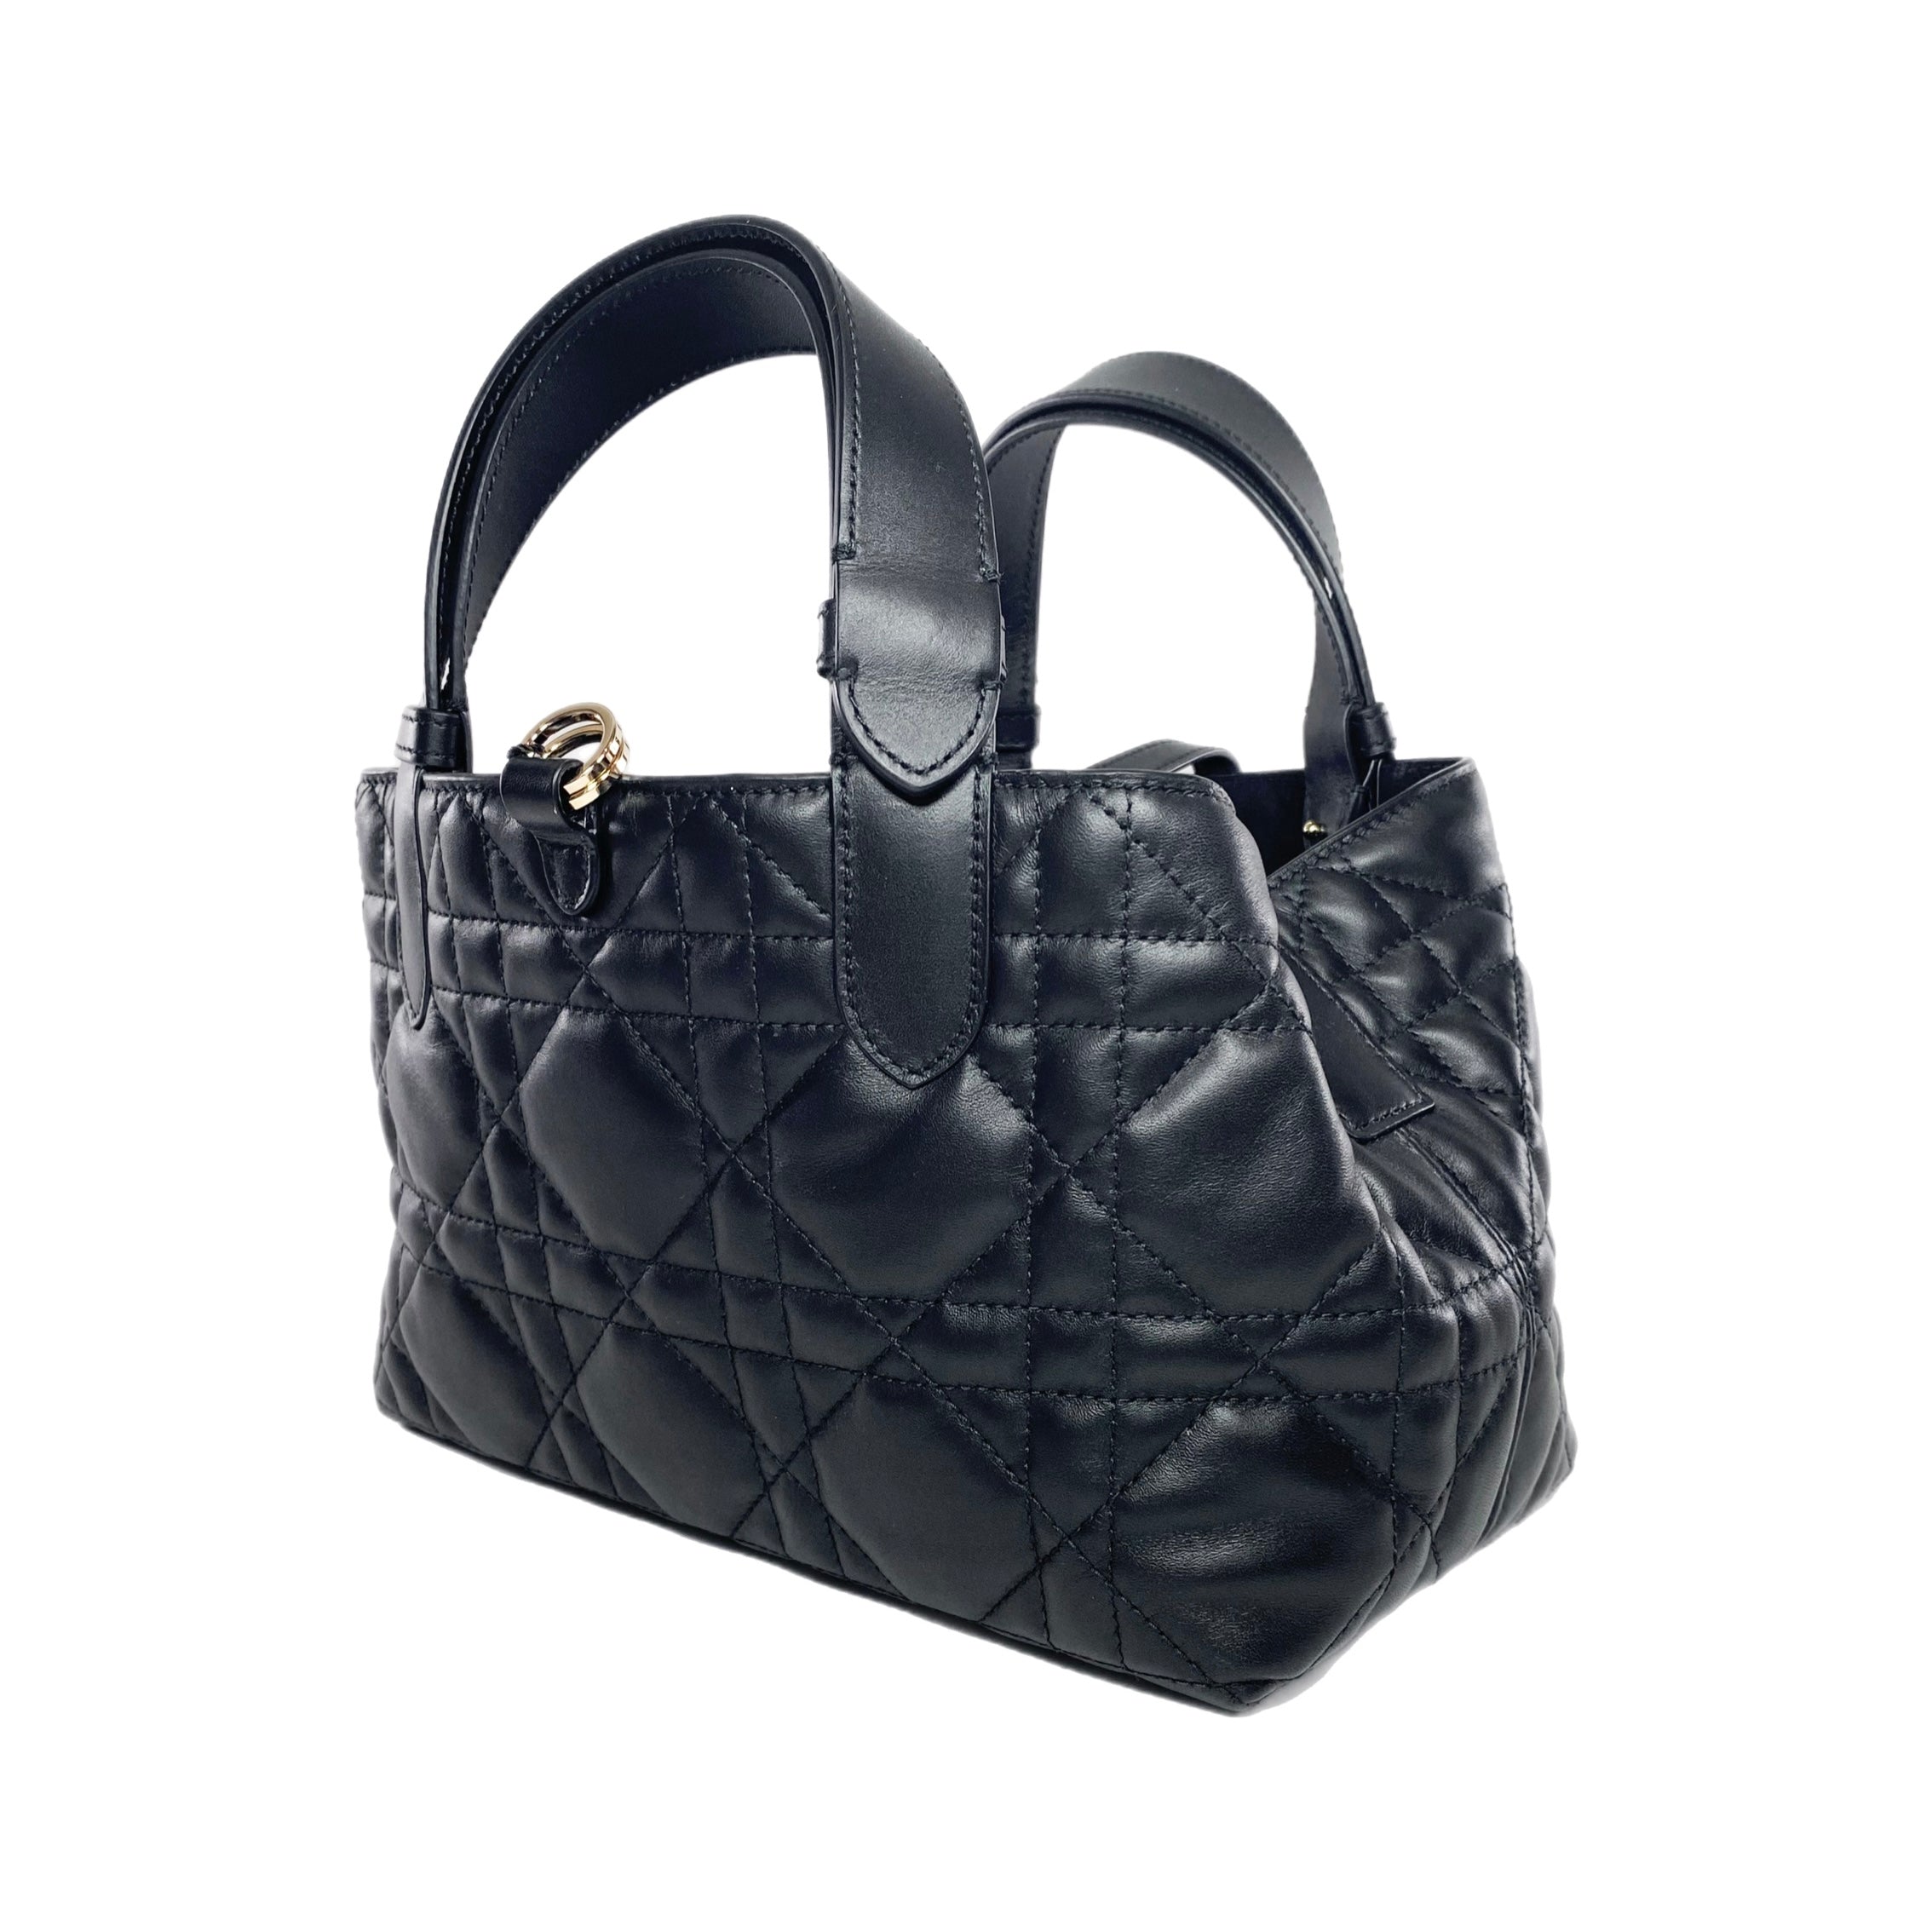 Dior Black Small Toujours Bag